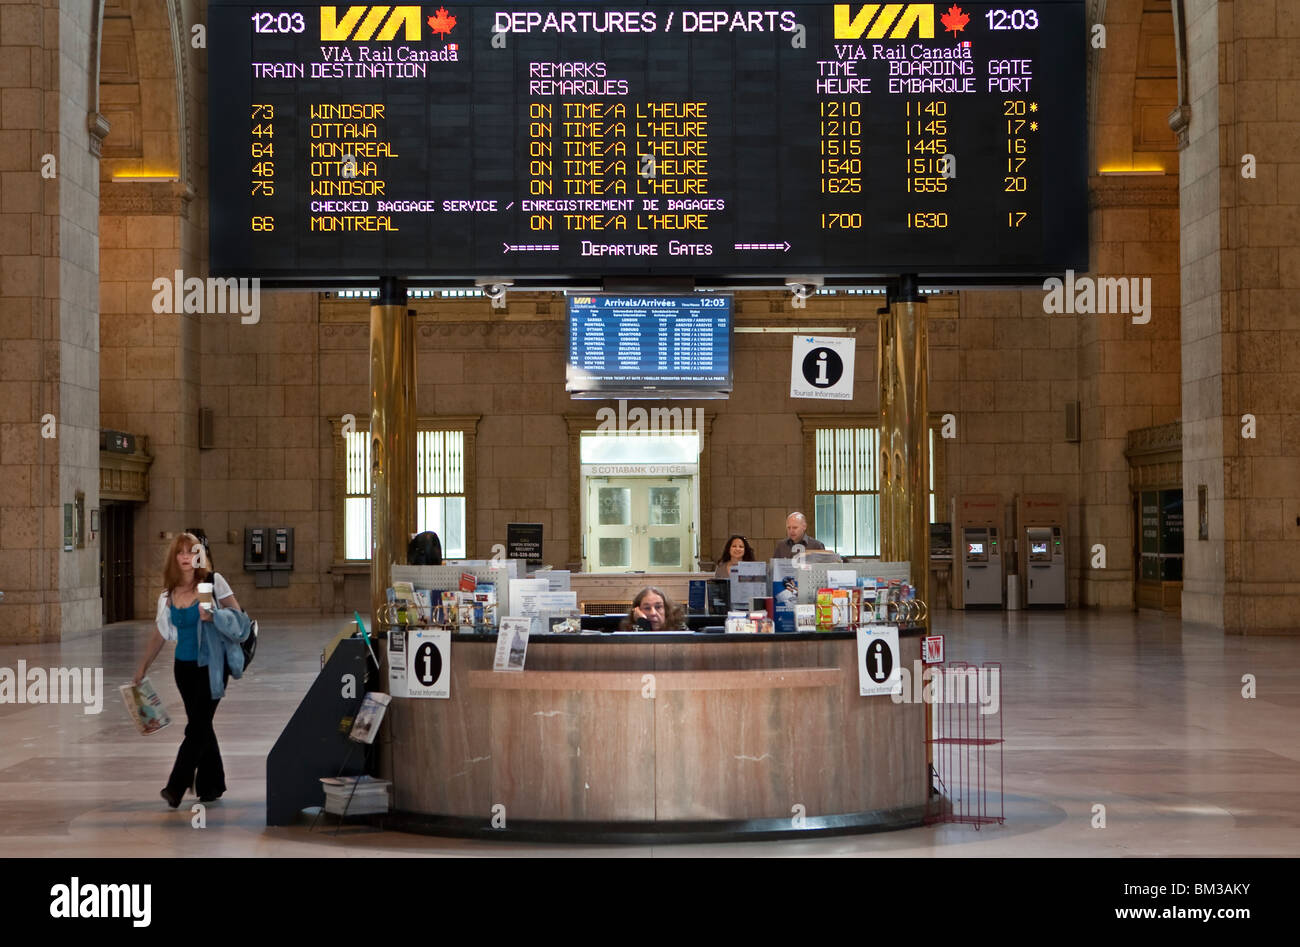 Electronic departures board is seen in Toronto Union Station Stock Photo